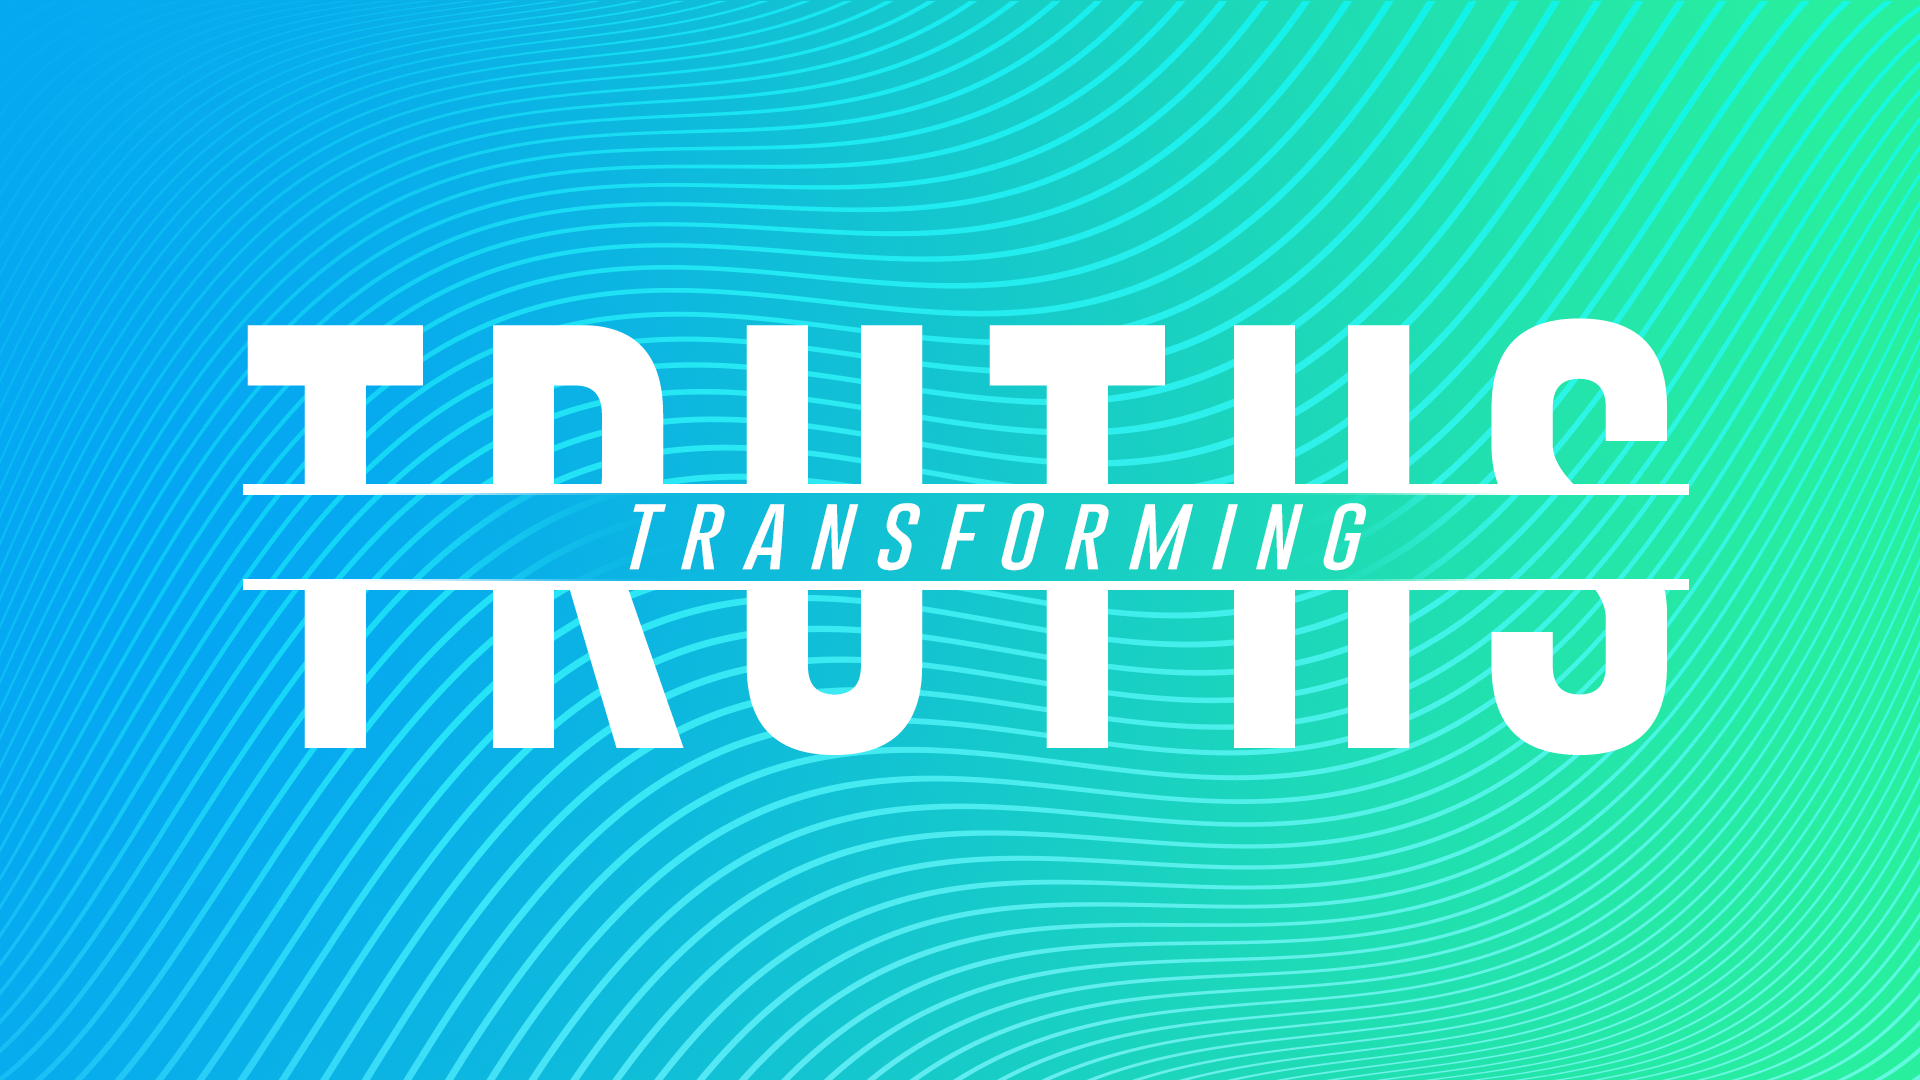 August 2, 2020 – Transforming Truths